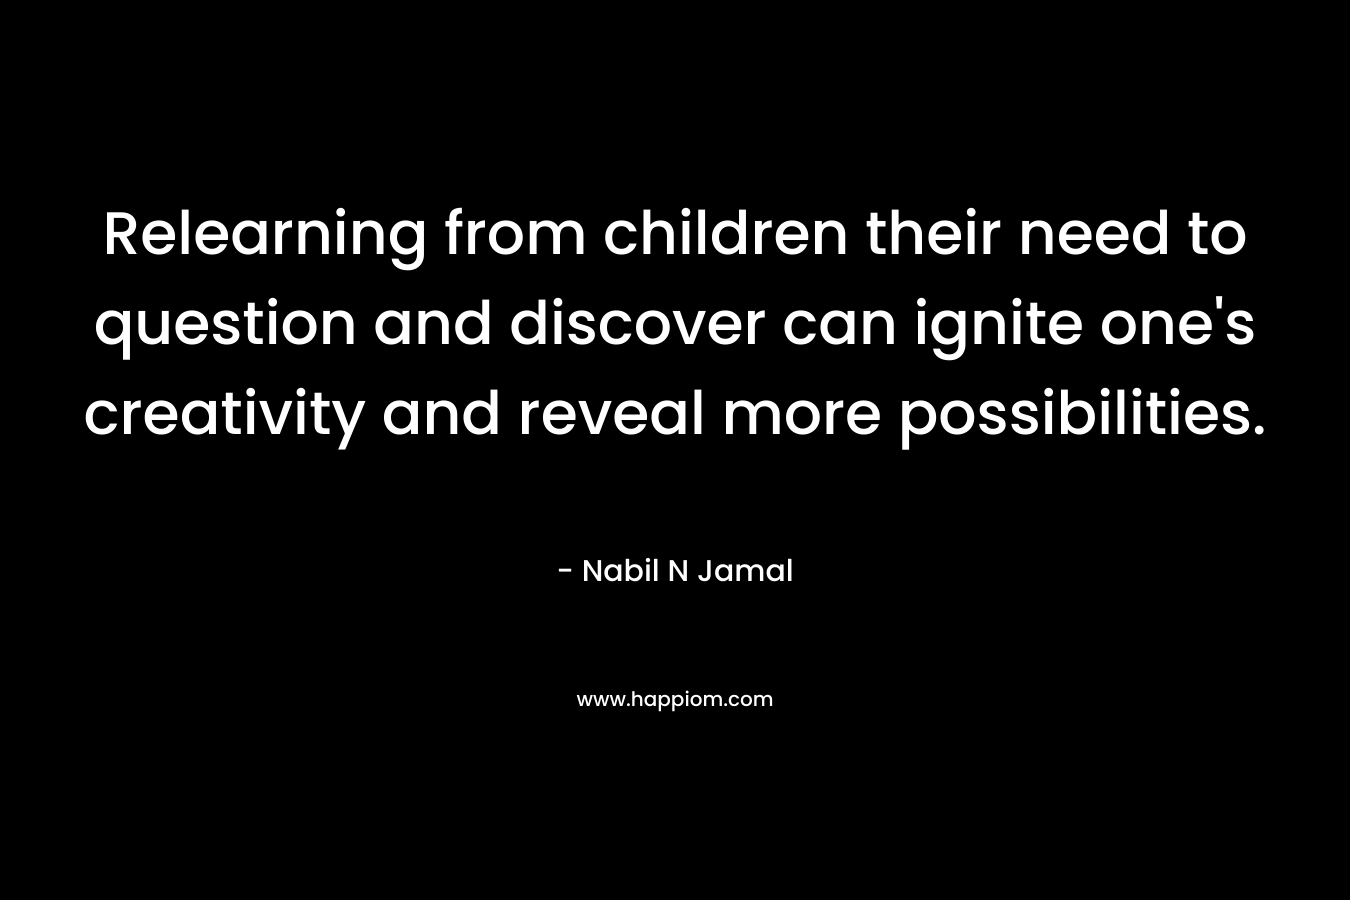 Relearning from children their need to question and discover can ignite one’s creativity and reveal more possibilities. – Nabil N Jamal